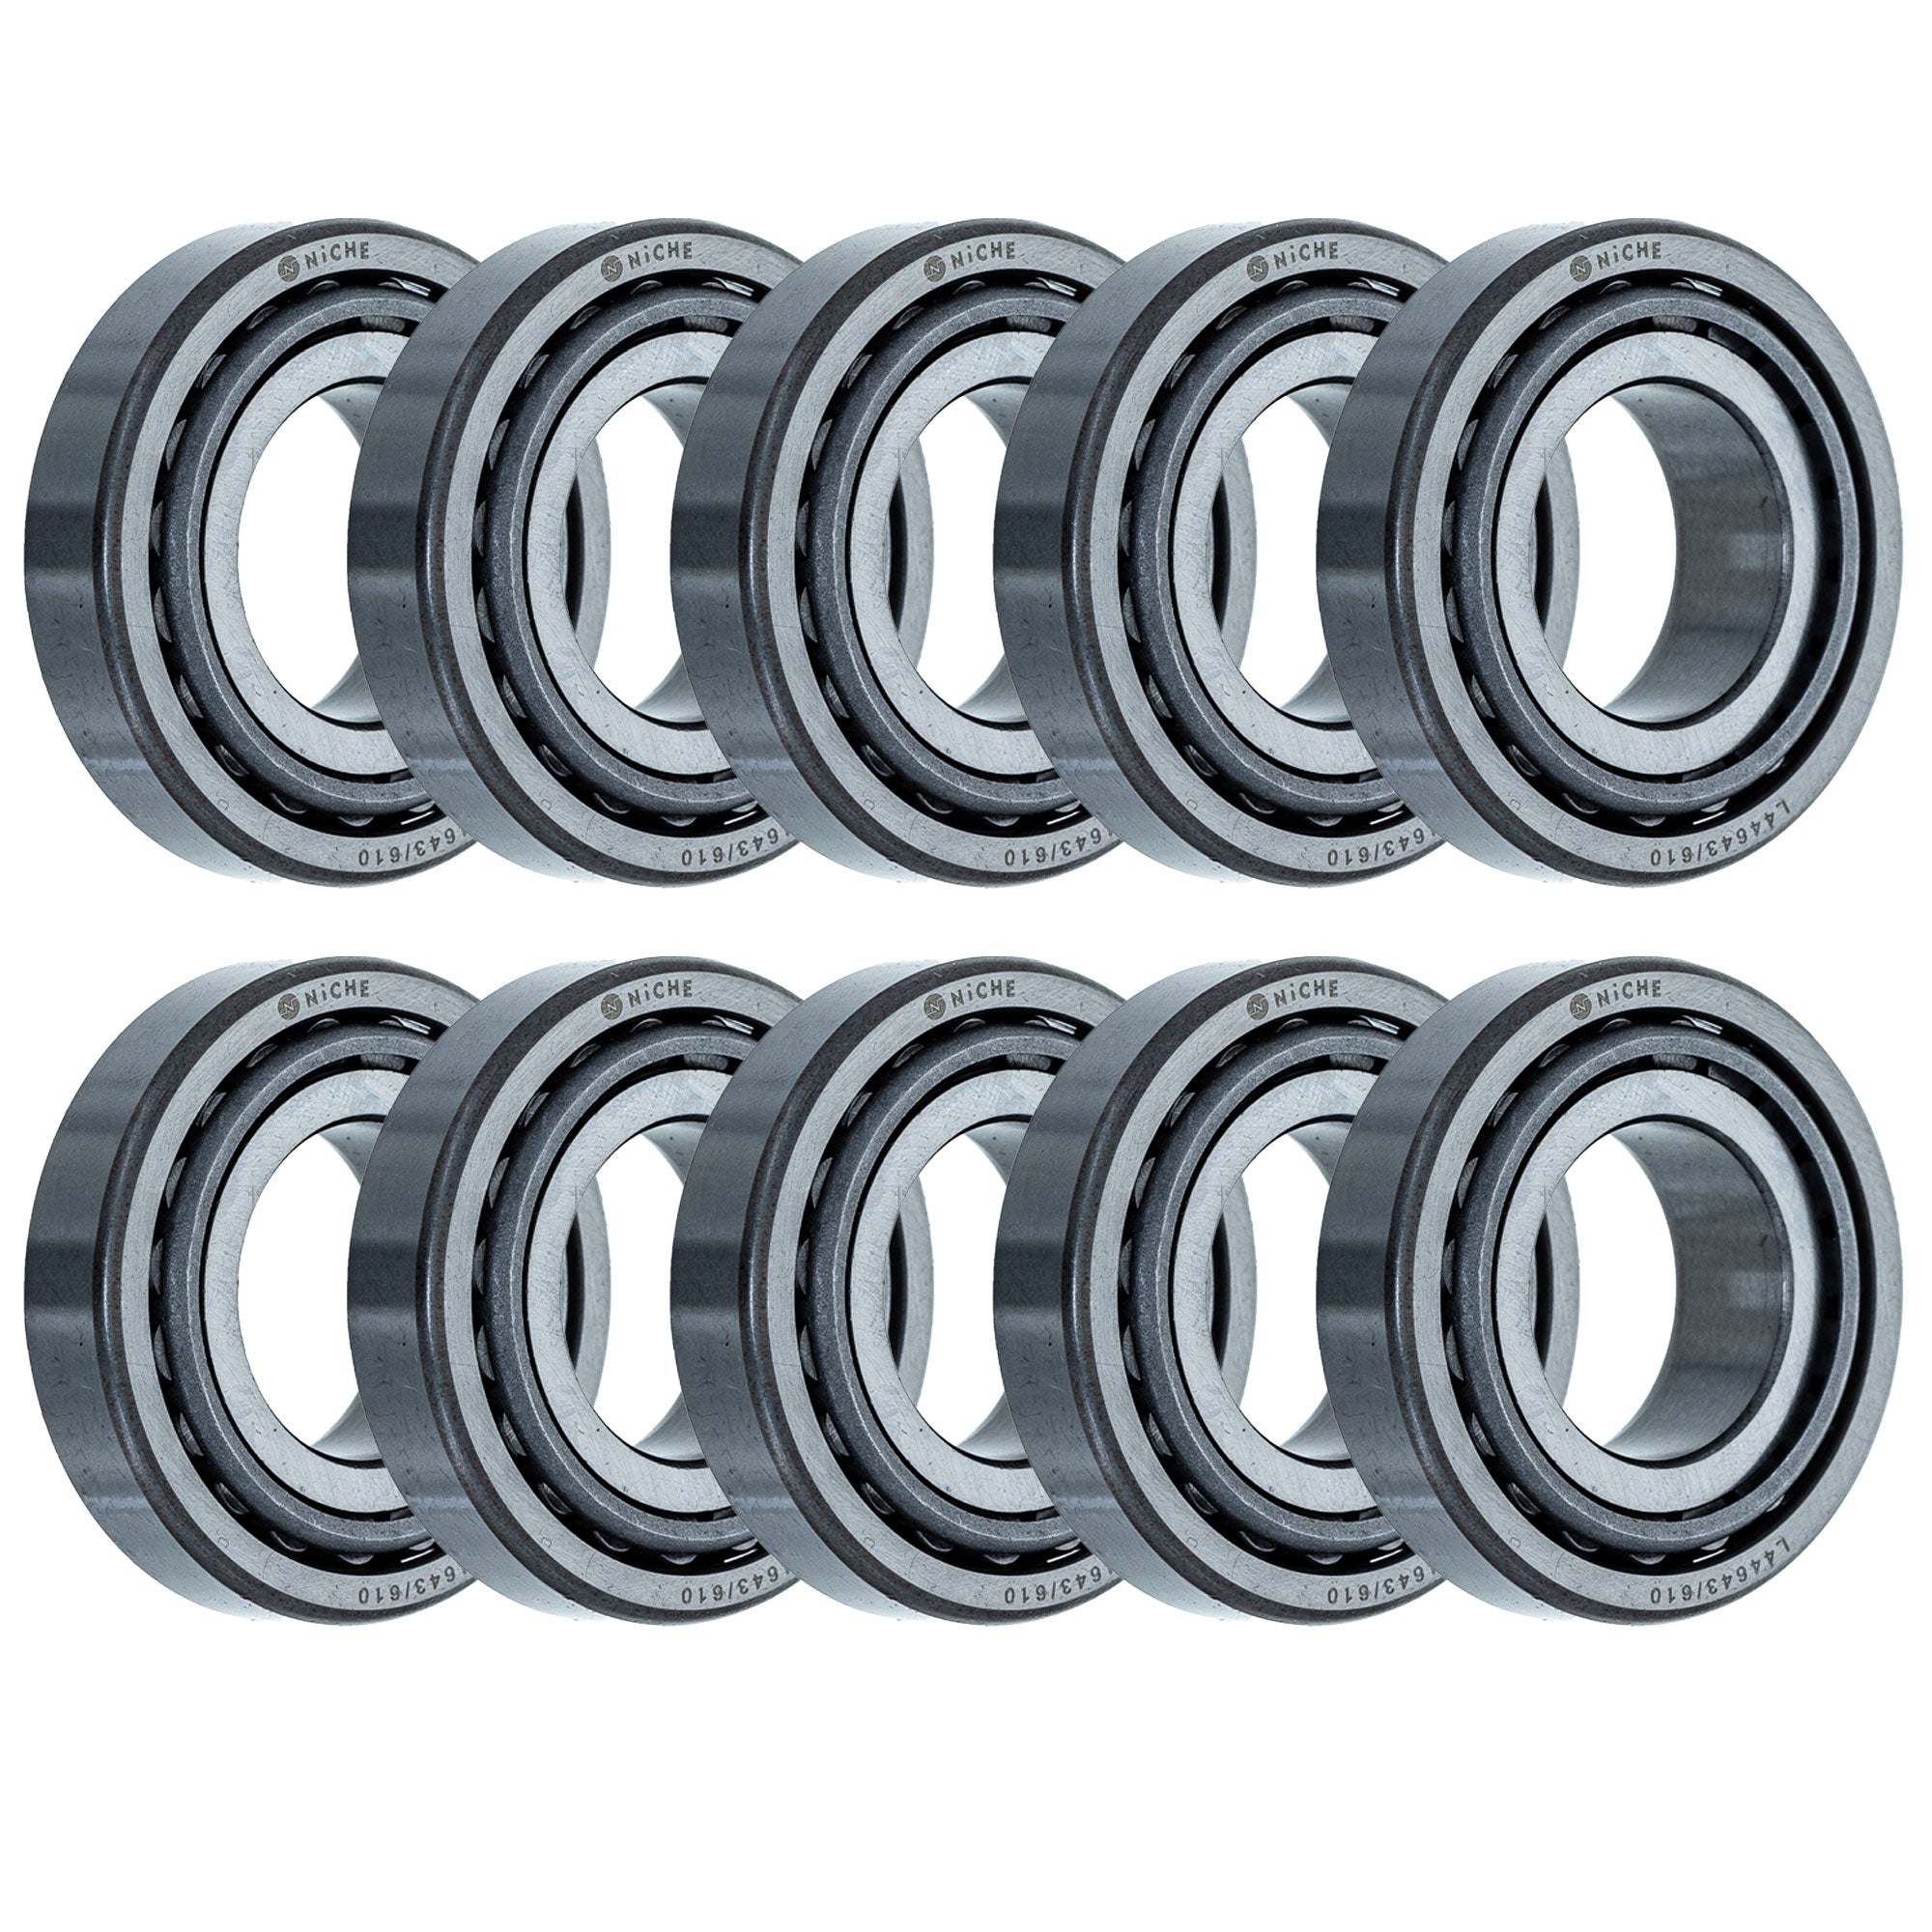 Tapered Roller Bearing Pack of 10 10-Pack for zOTHER Xplorer Xpedition Worker Trail-Boss NICHE 519-CBB2240R